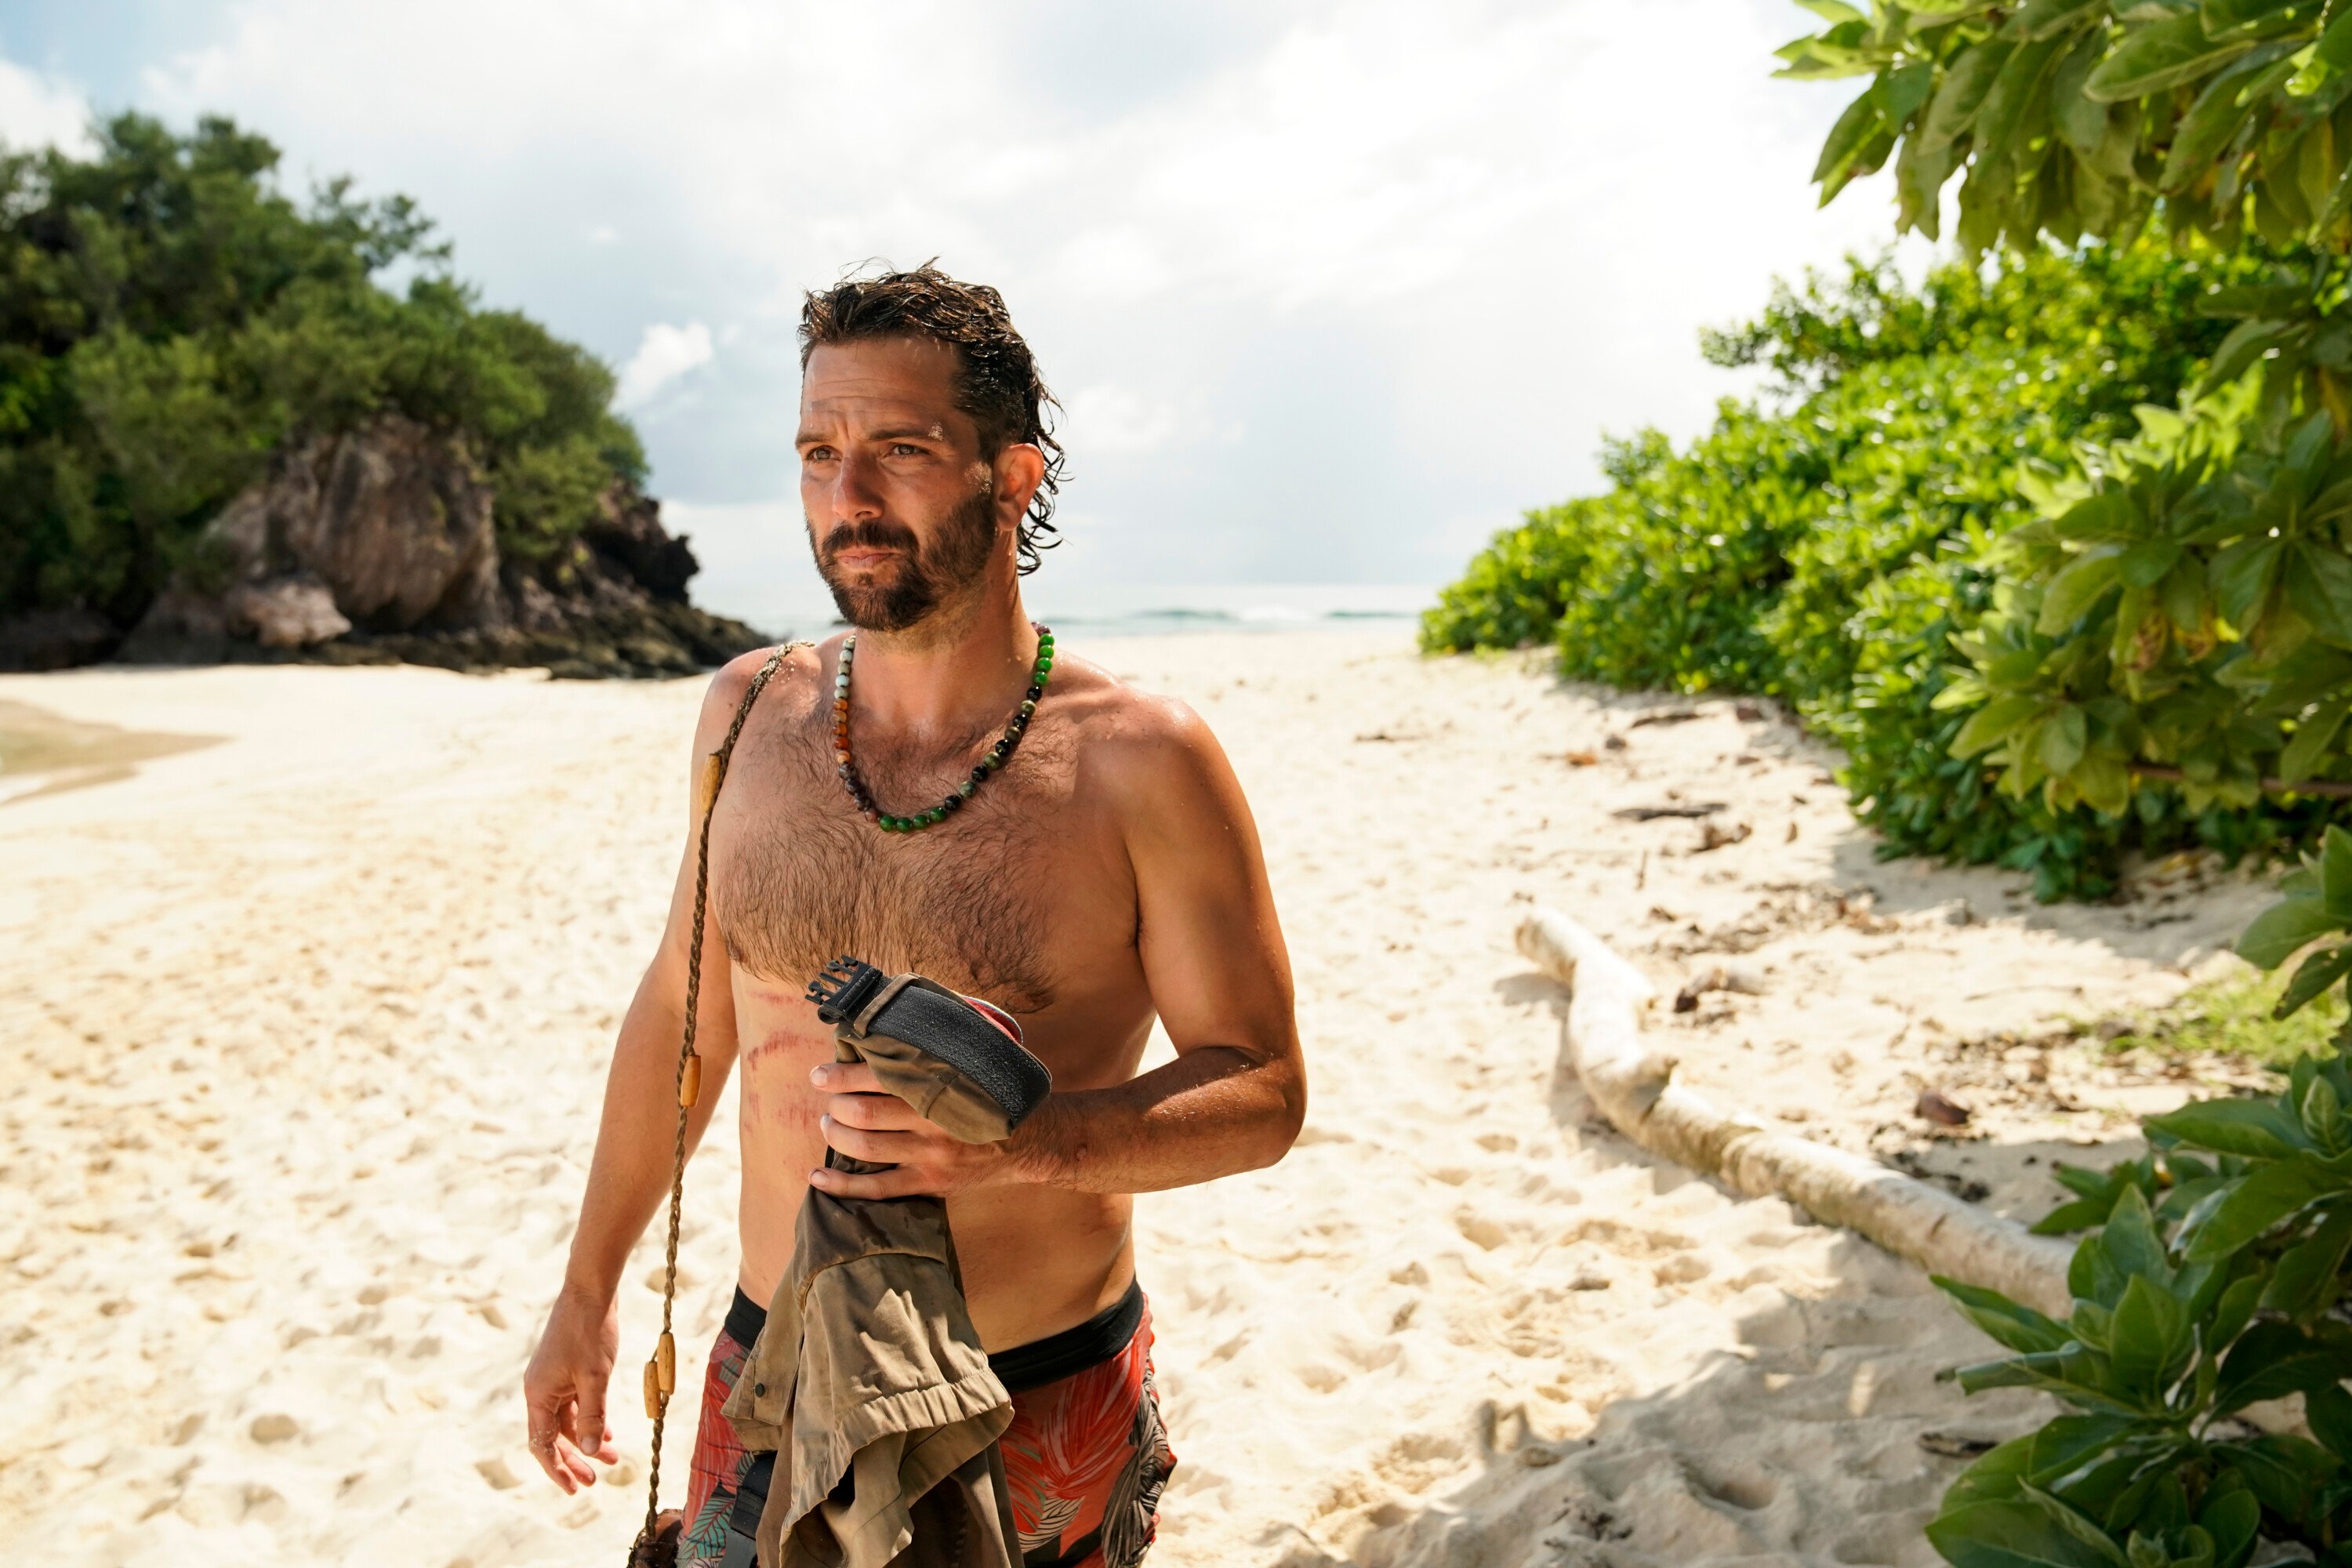 Cody Assenmacher, who is still in the running to be the 'Survivor' Season 43 winner, walks on the beach wearing red and black underwear and a beaded necklace.